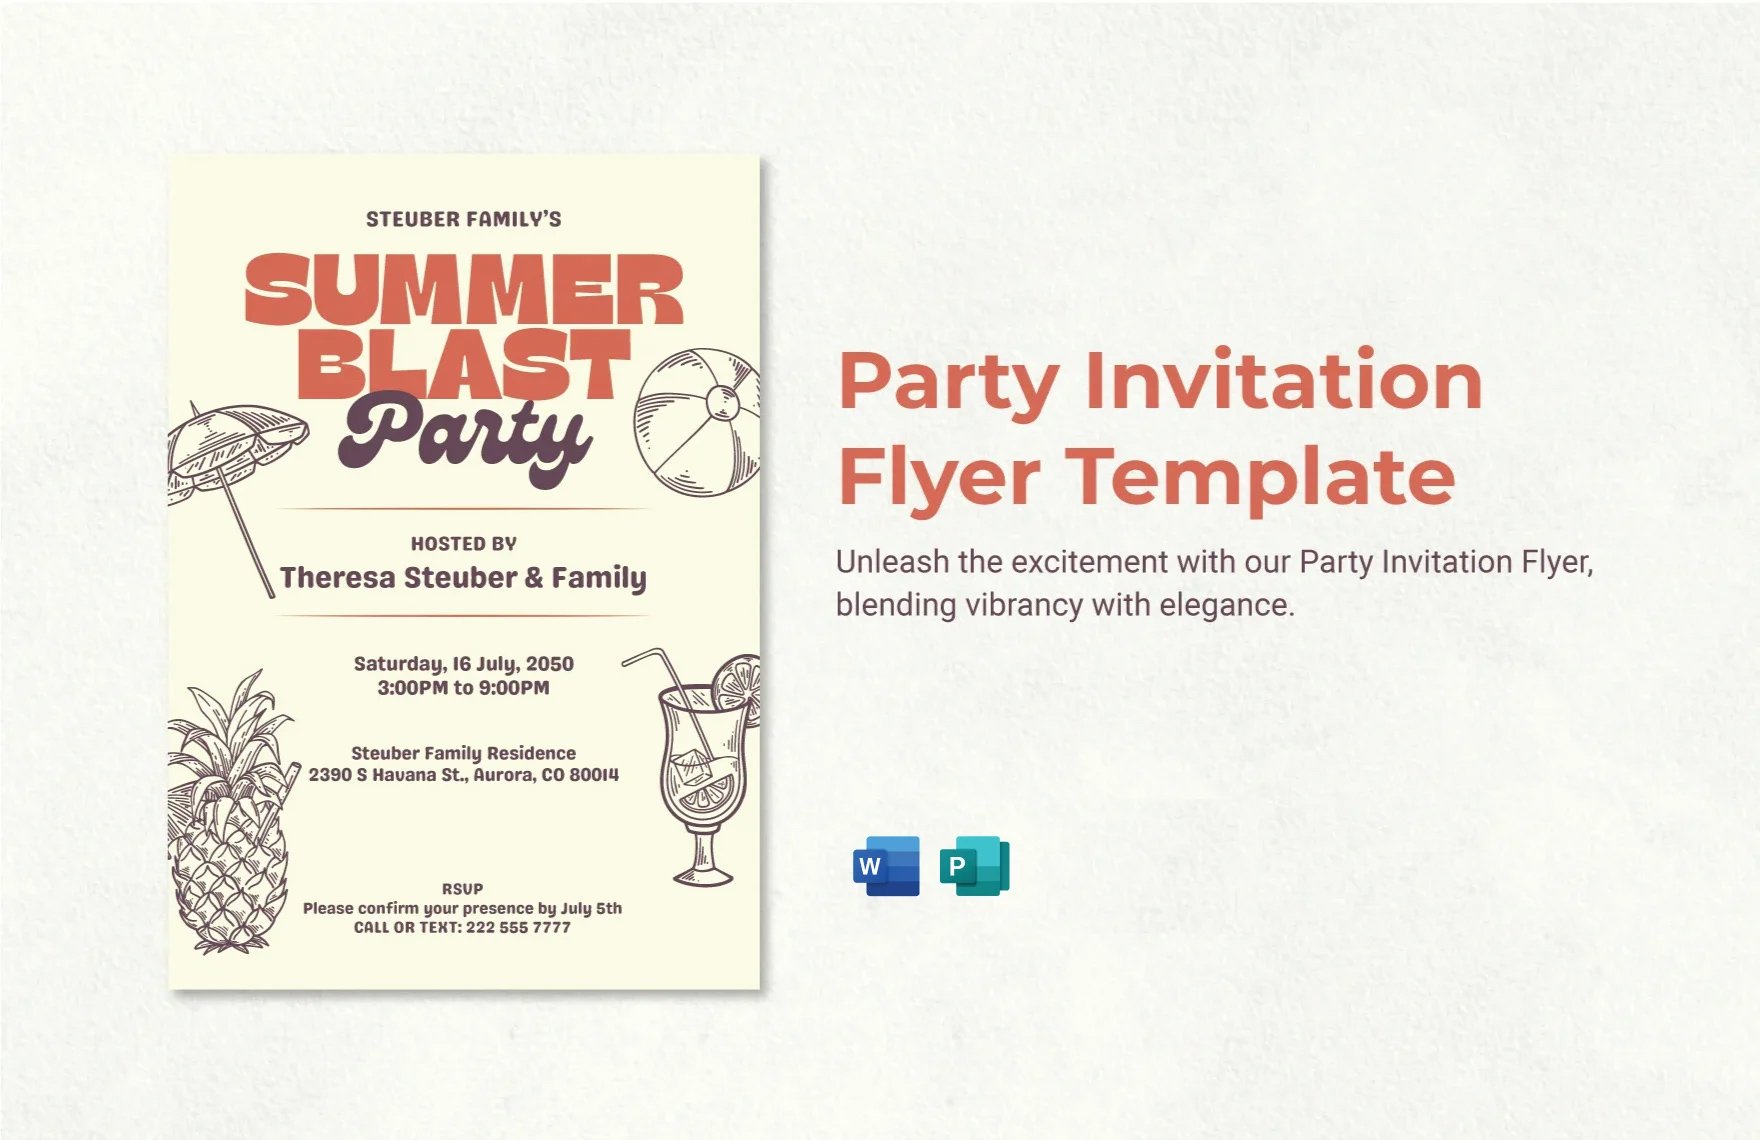 Party Invitation Flyer Template in Word, Publisher